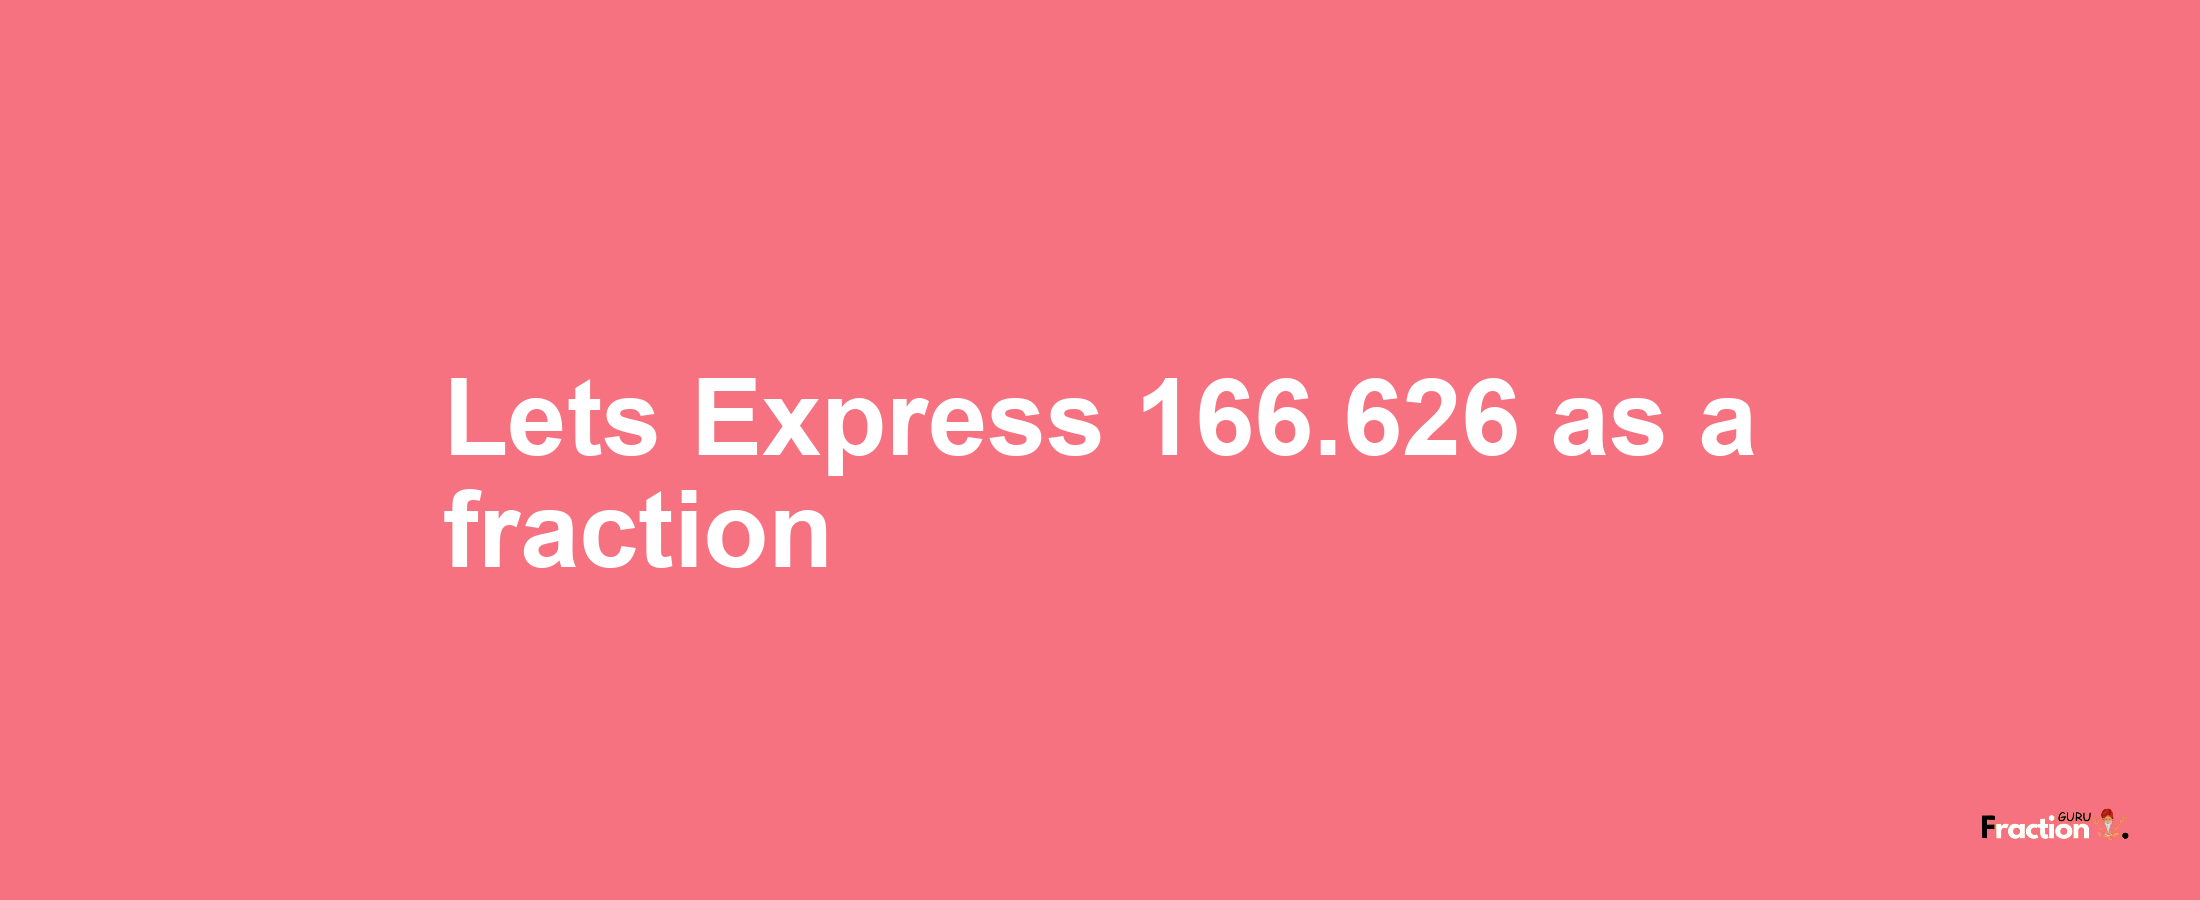 Lets Express 166.626 as afraction